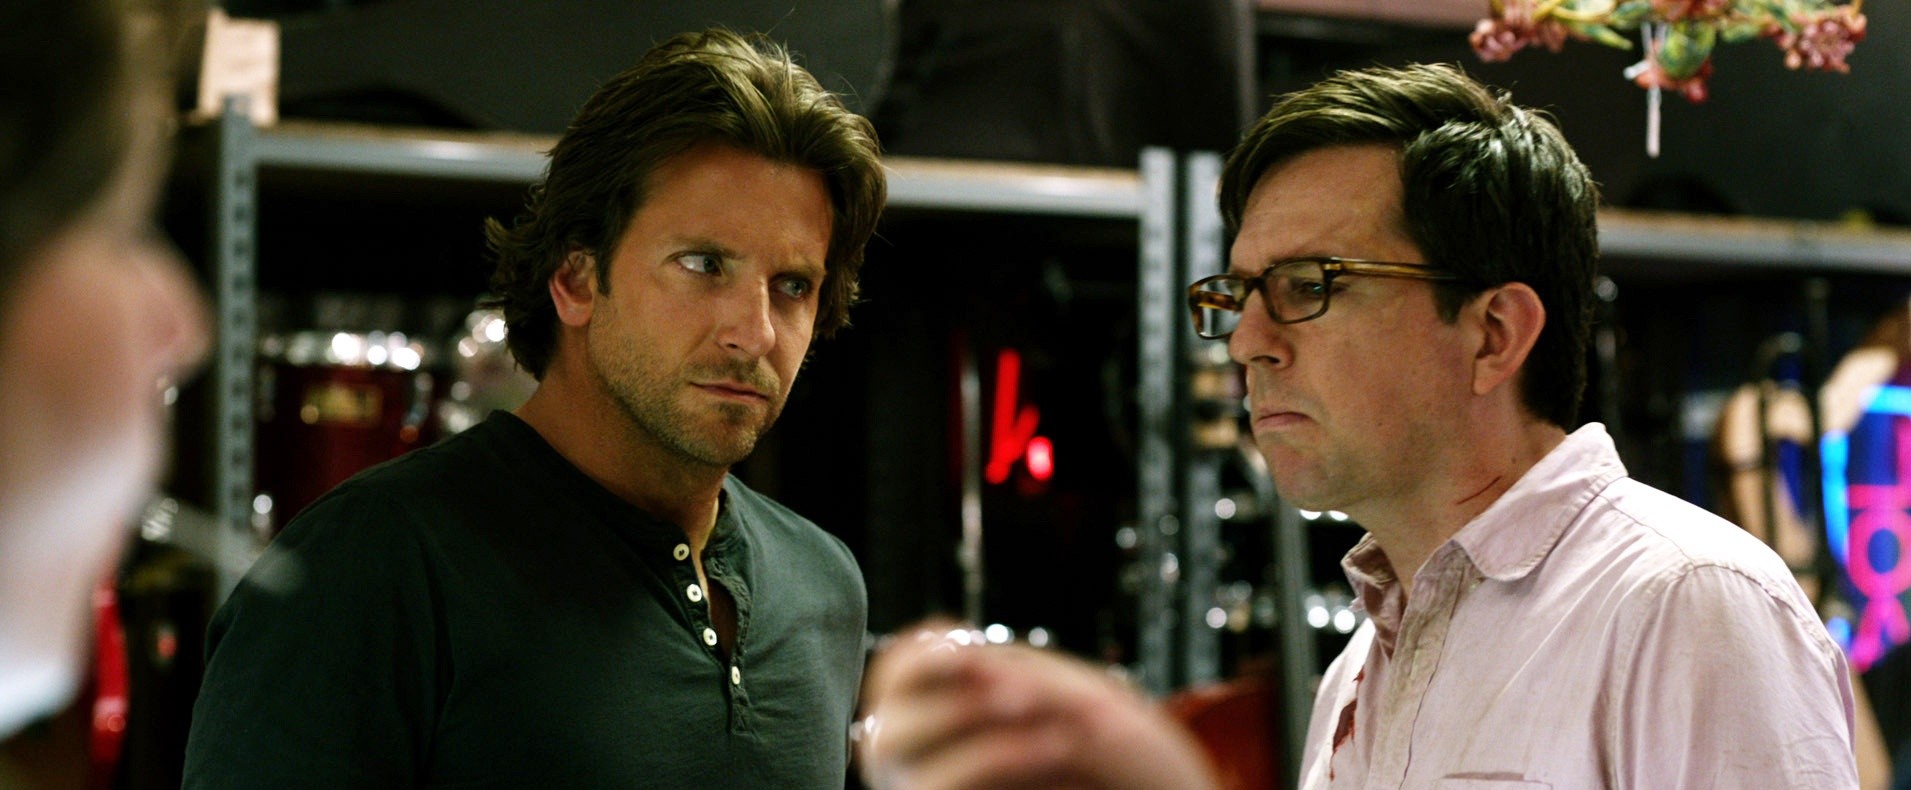 Bradley Cooper stars as Phil and Ed Helms stars as Stu in Warner Bros. Pictures' The Hangover Part III (2013)